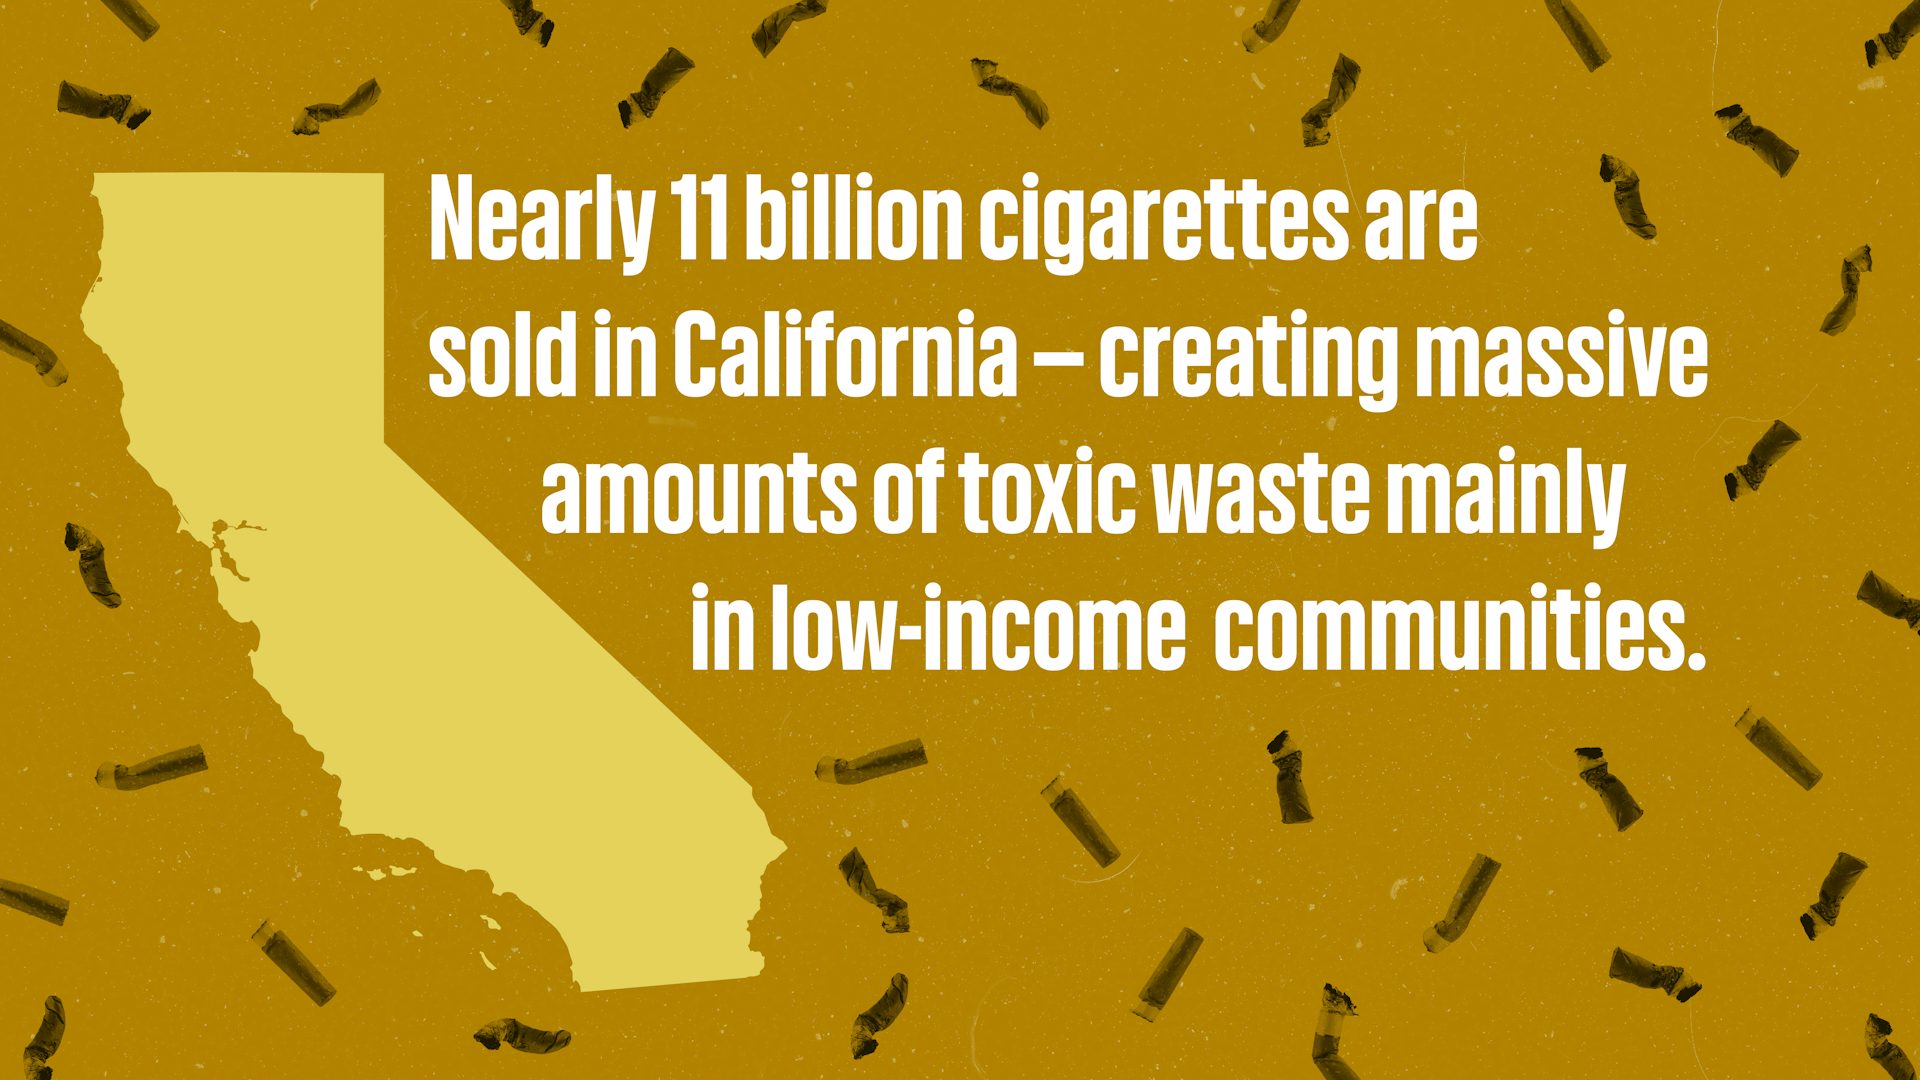 Nearly 11 billion cigarettes are sold in California — creating massive amounts of toxic waste mainly in low-income communities